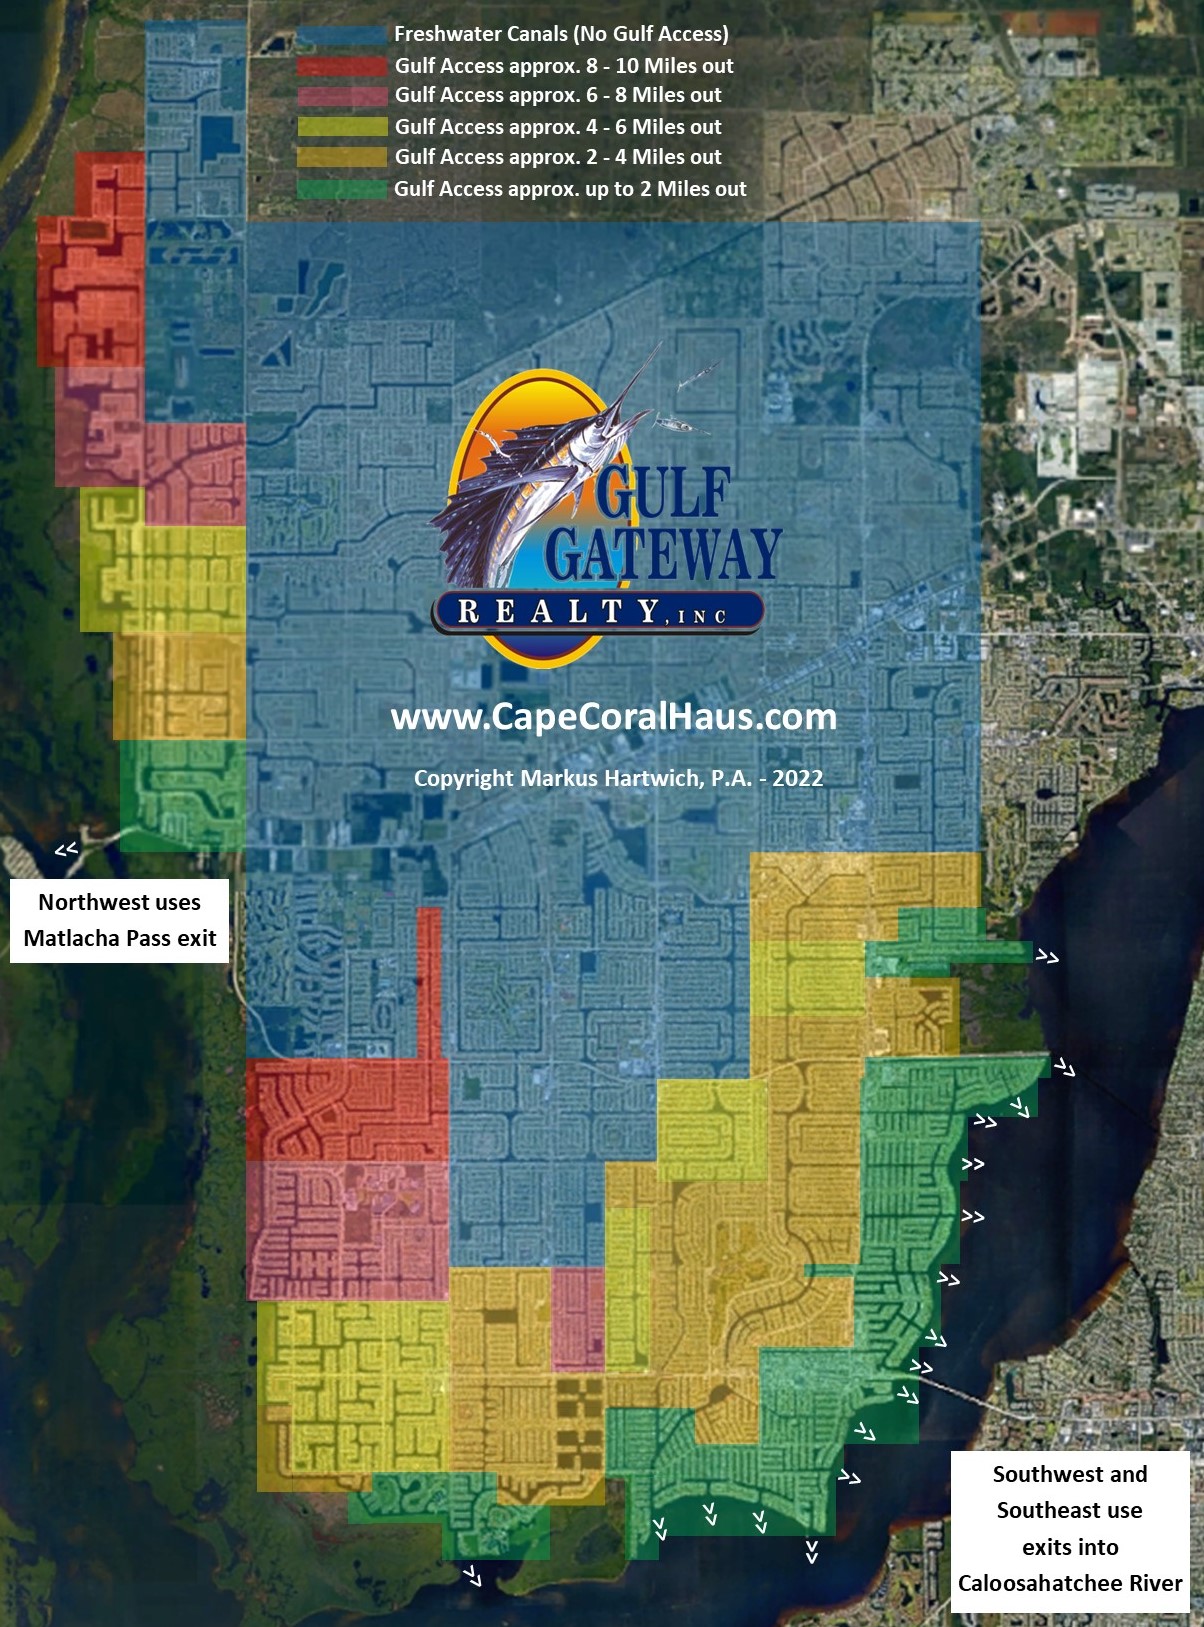 Cape Coral Boating Distances Map 